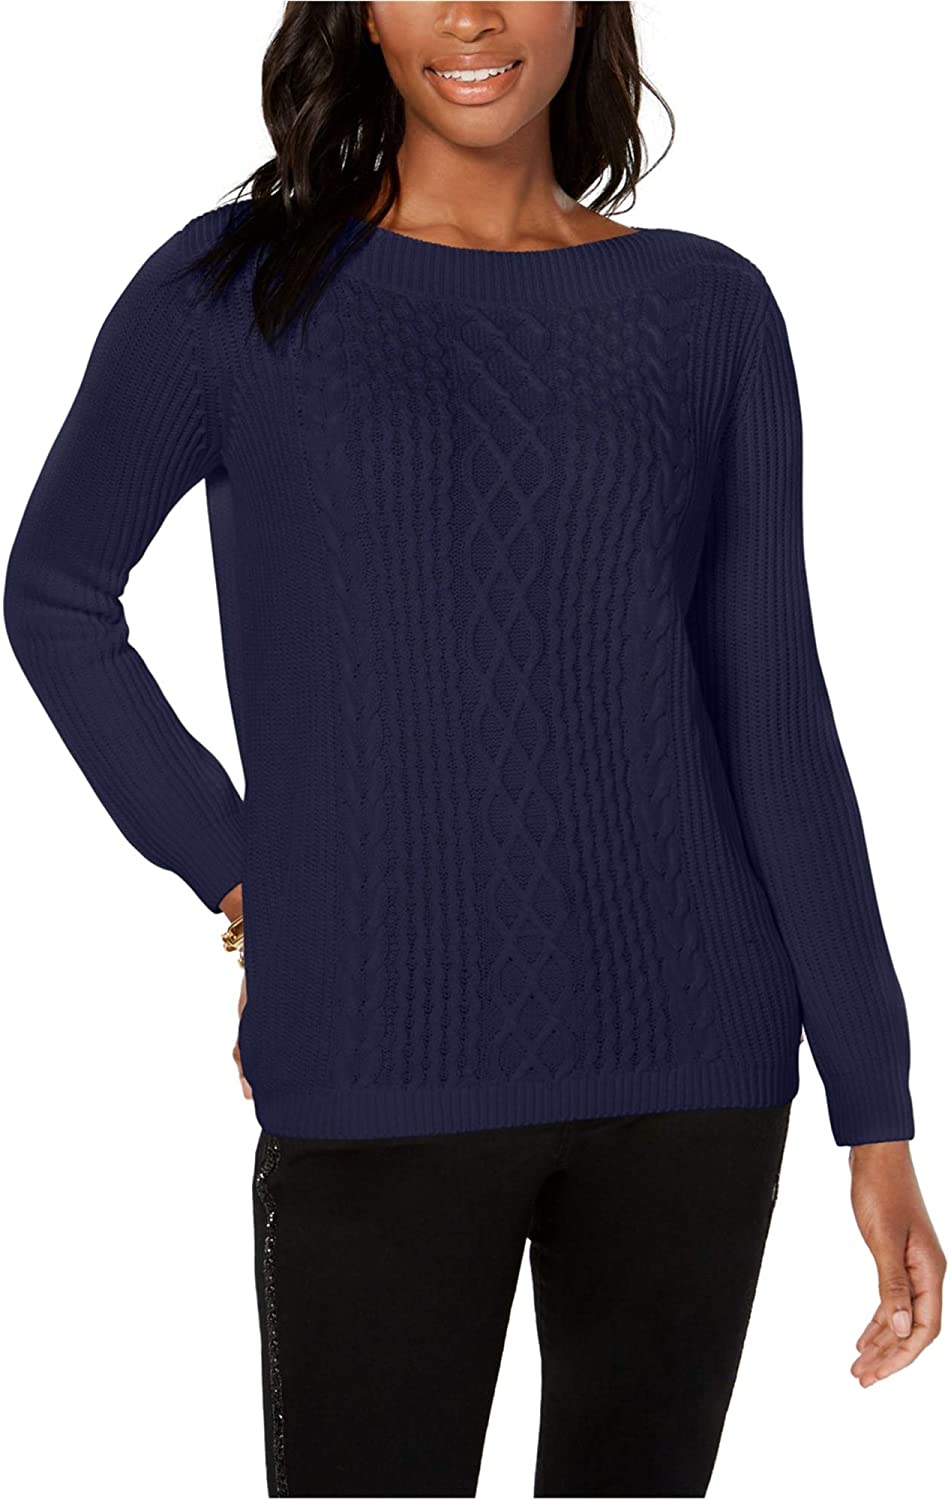 Tommy Hilfiger Womens Cable-Knit Sweater